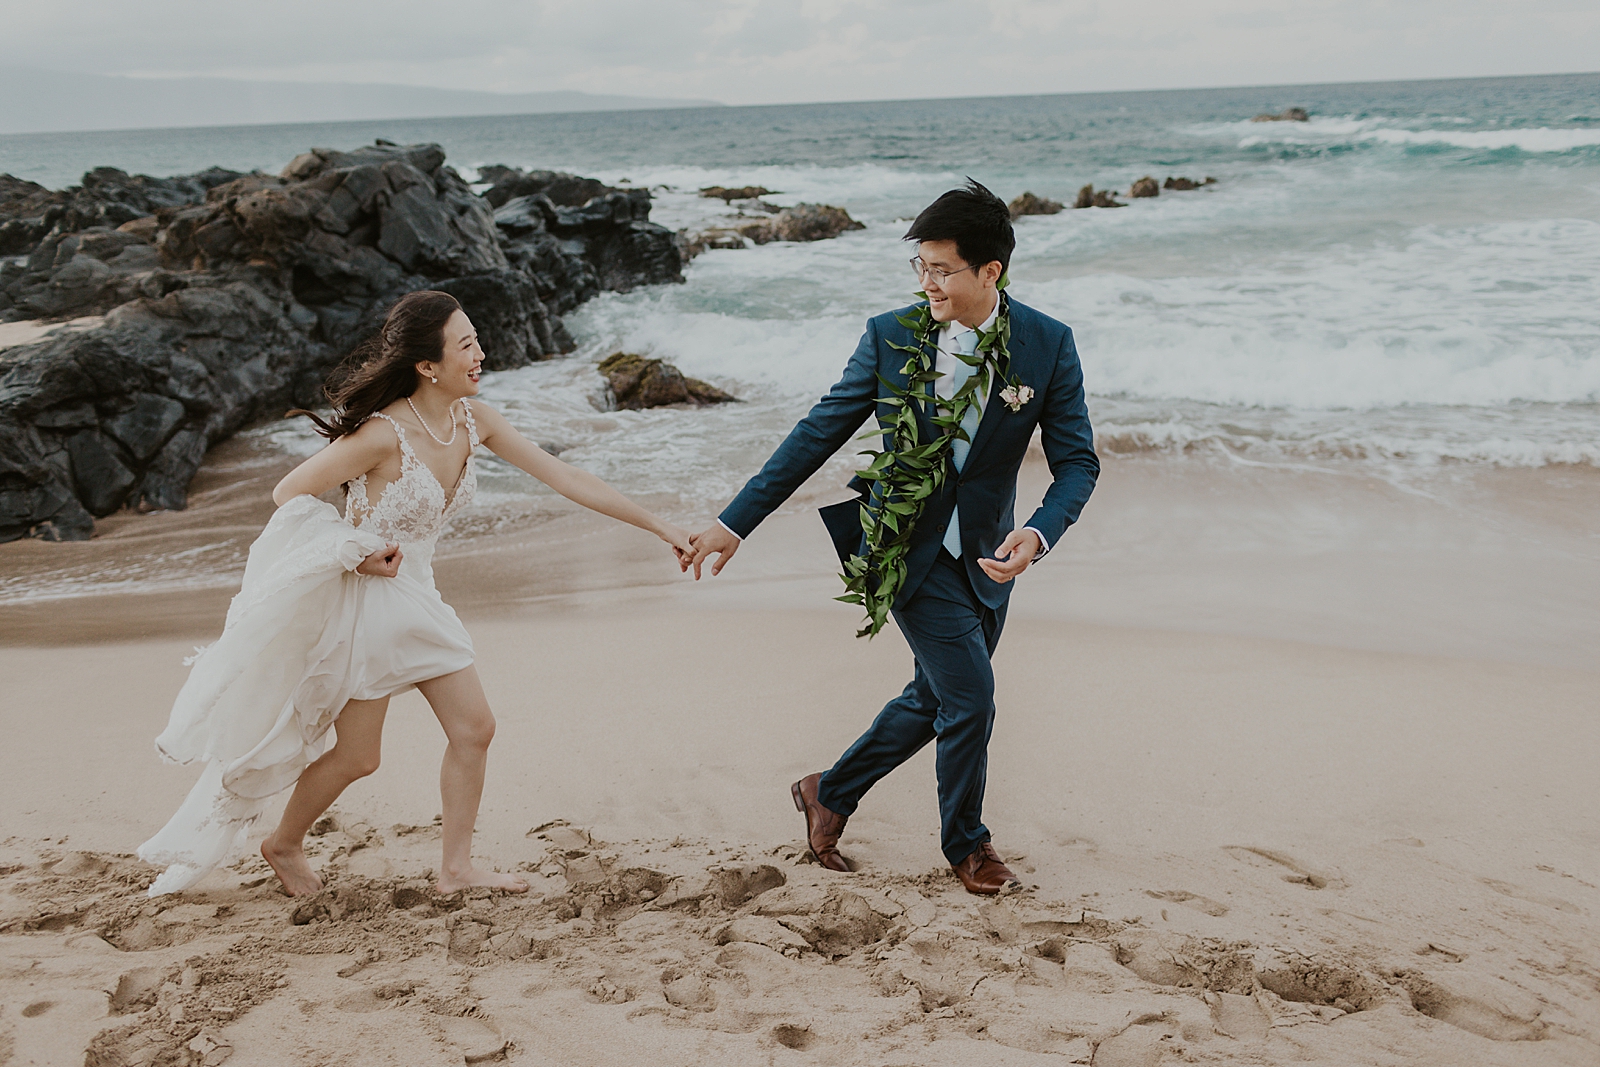 Bride and Groom running on the sand of the beach having fun